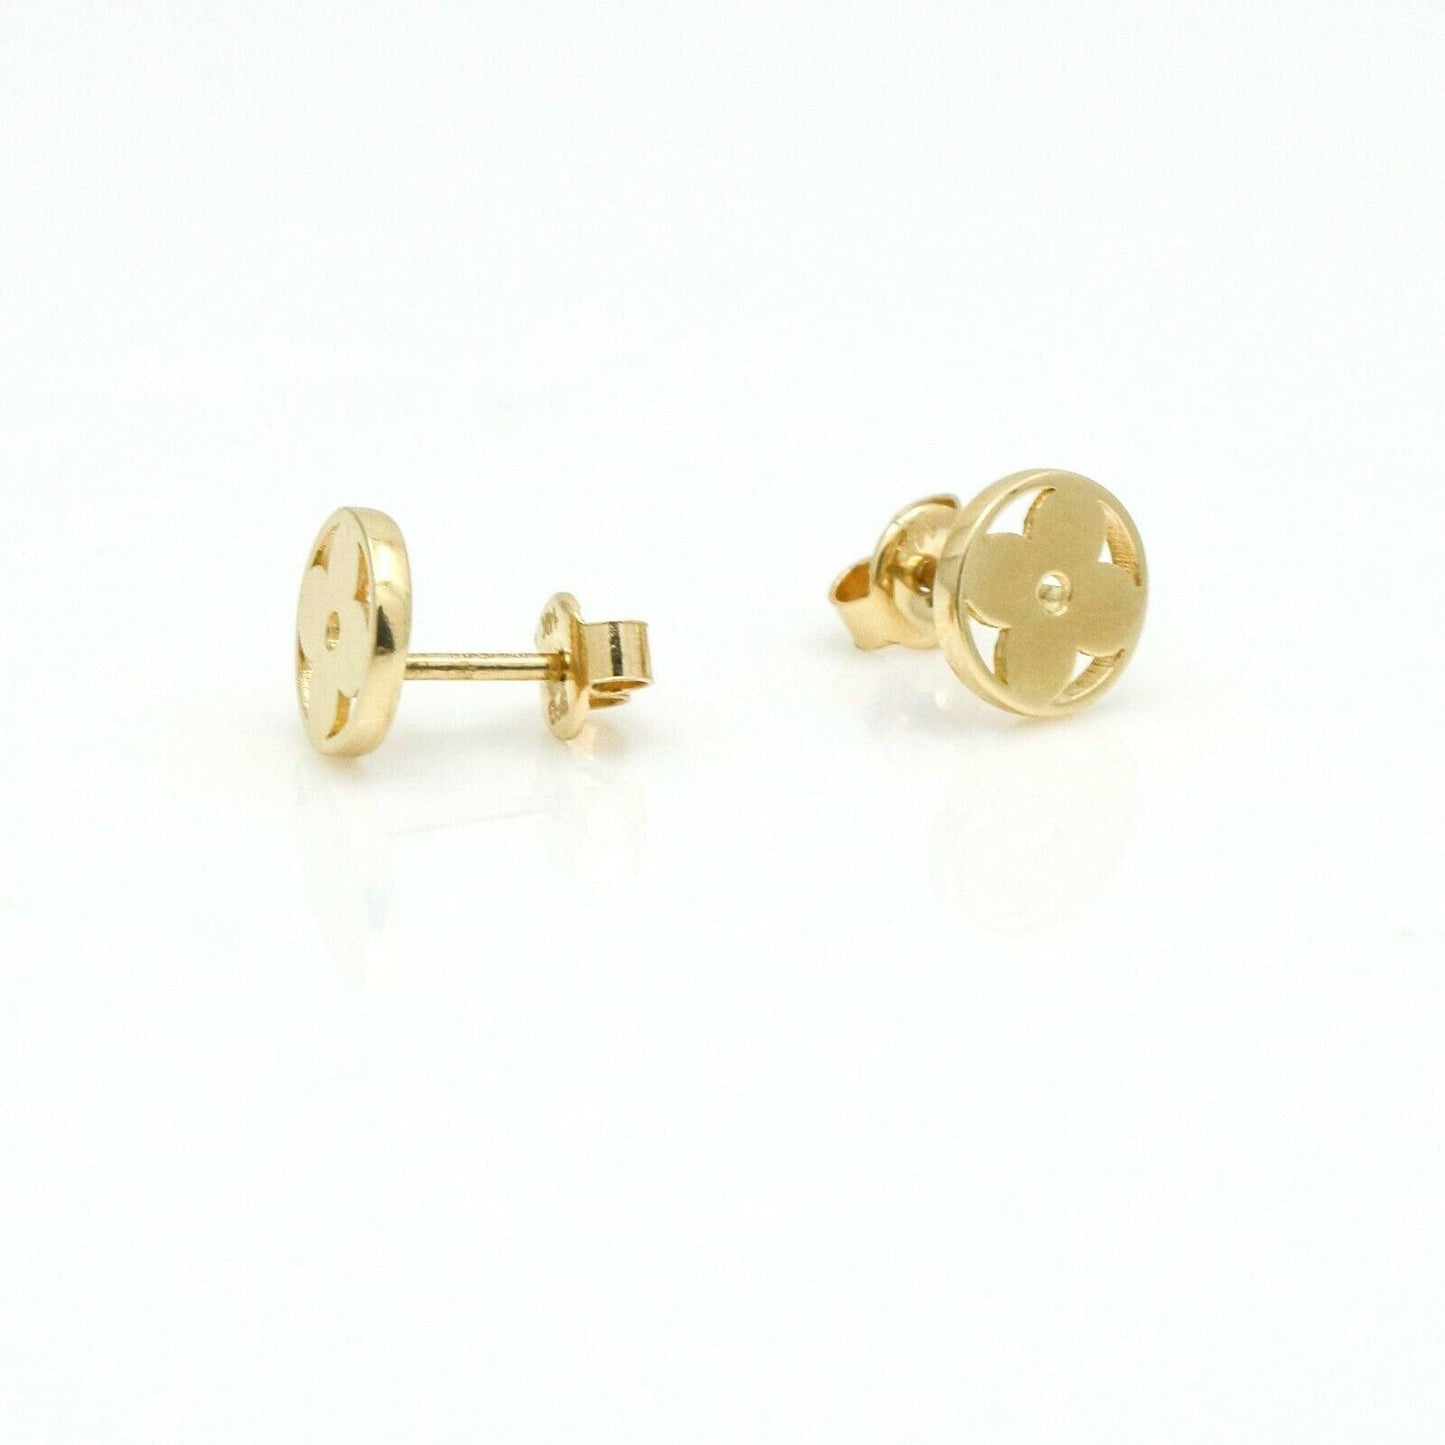 Women's Four-Leaf Clover Round Stud Earrings in 14k Yellow Gold - 31 Jewels Inc.